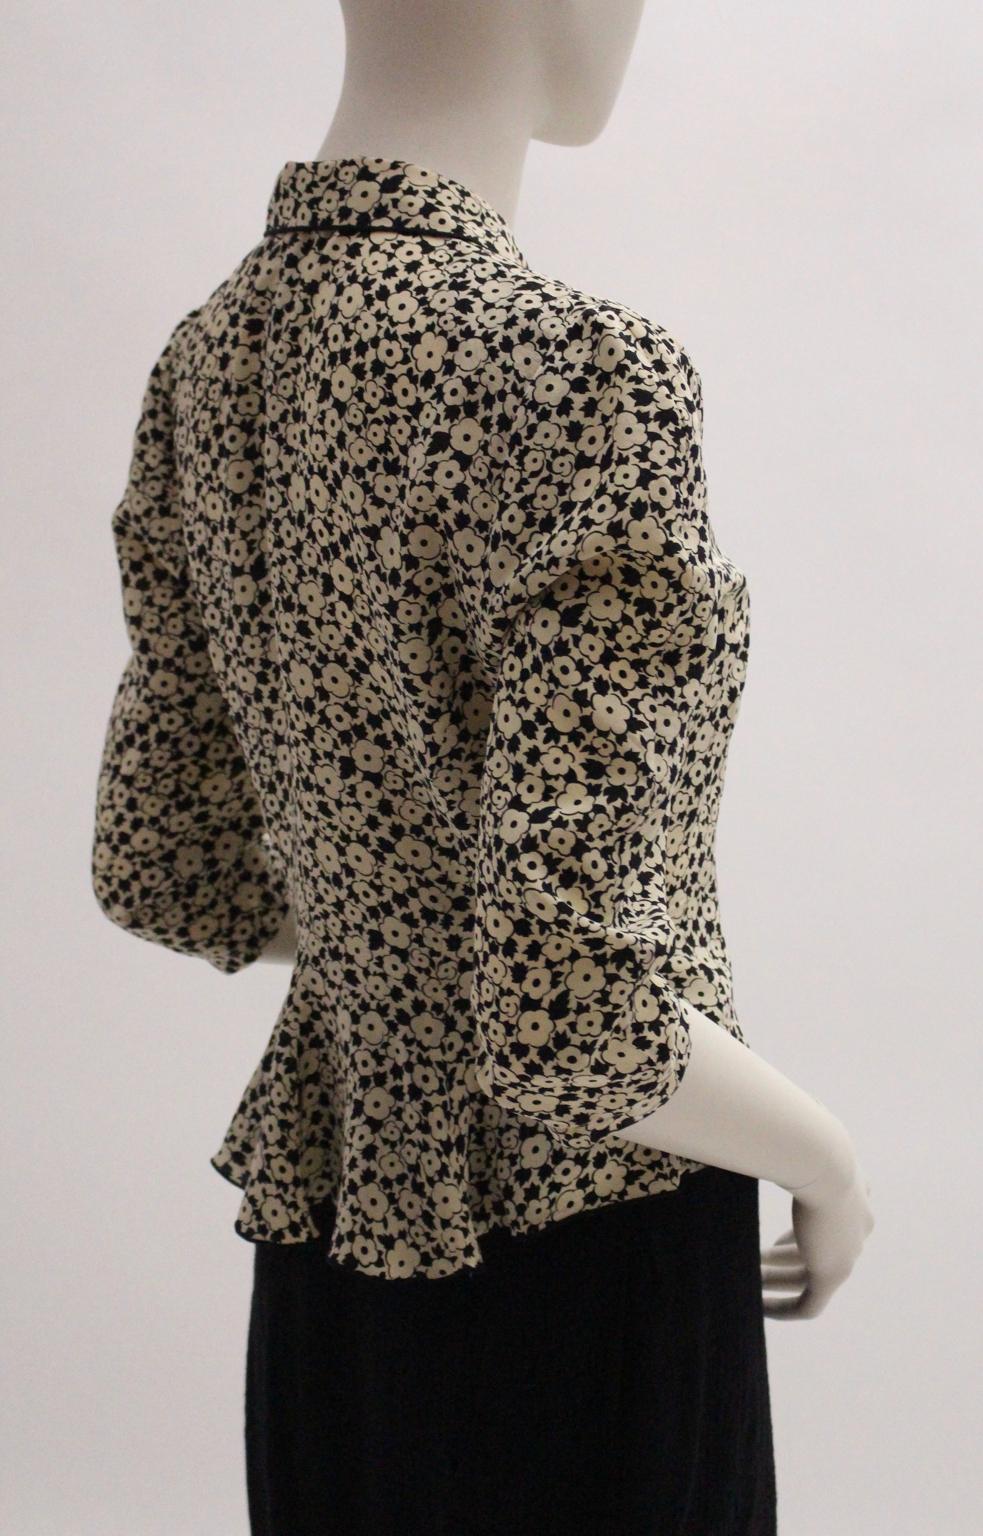 Lolita Lempicka Vintage Silk Blouse with Flower Allover Print  1980s For Sale 10